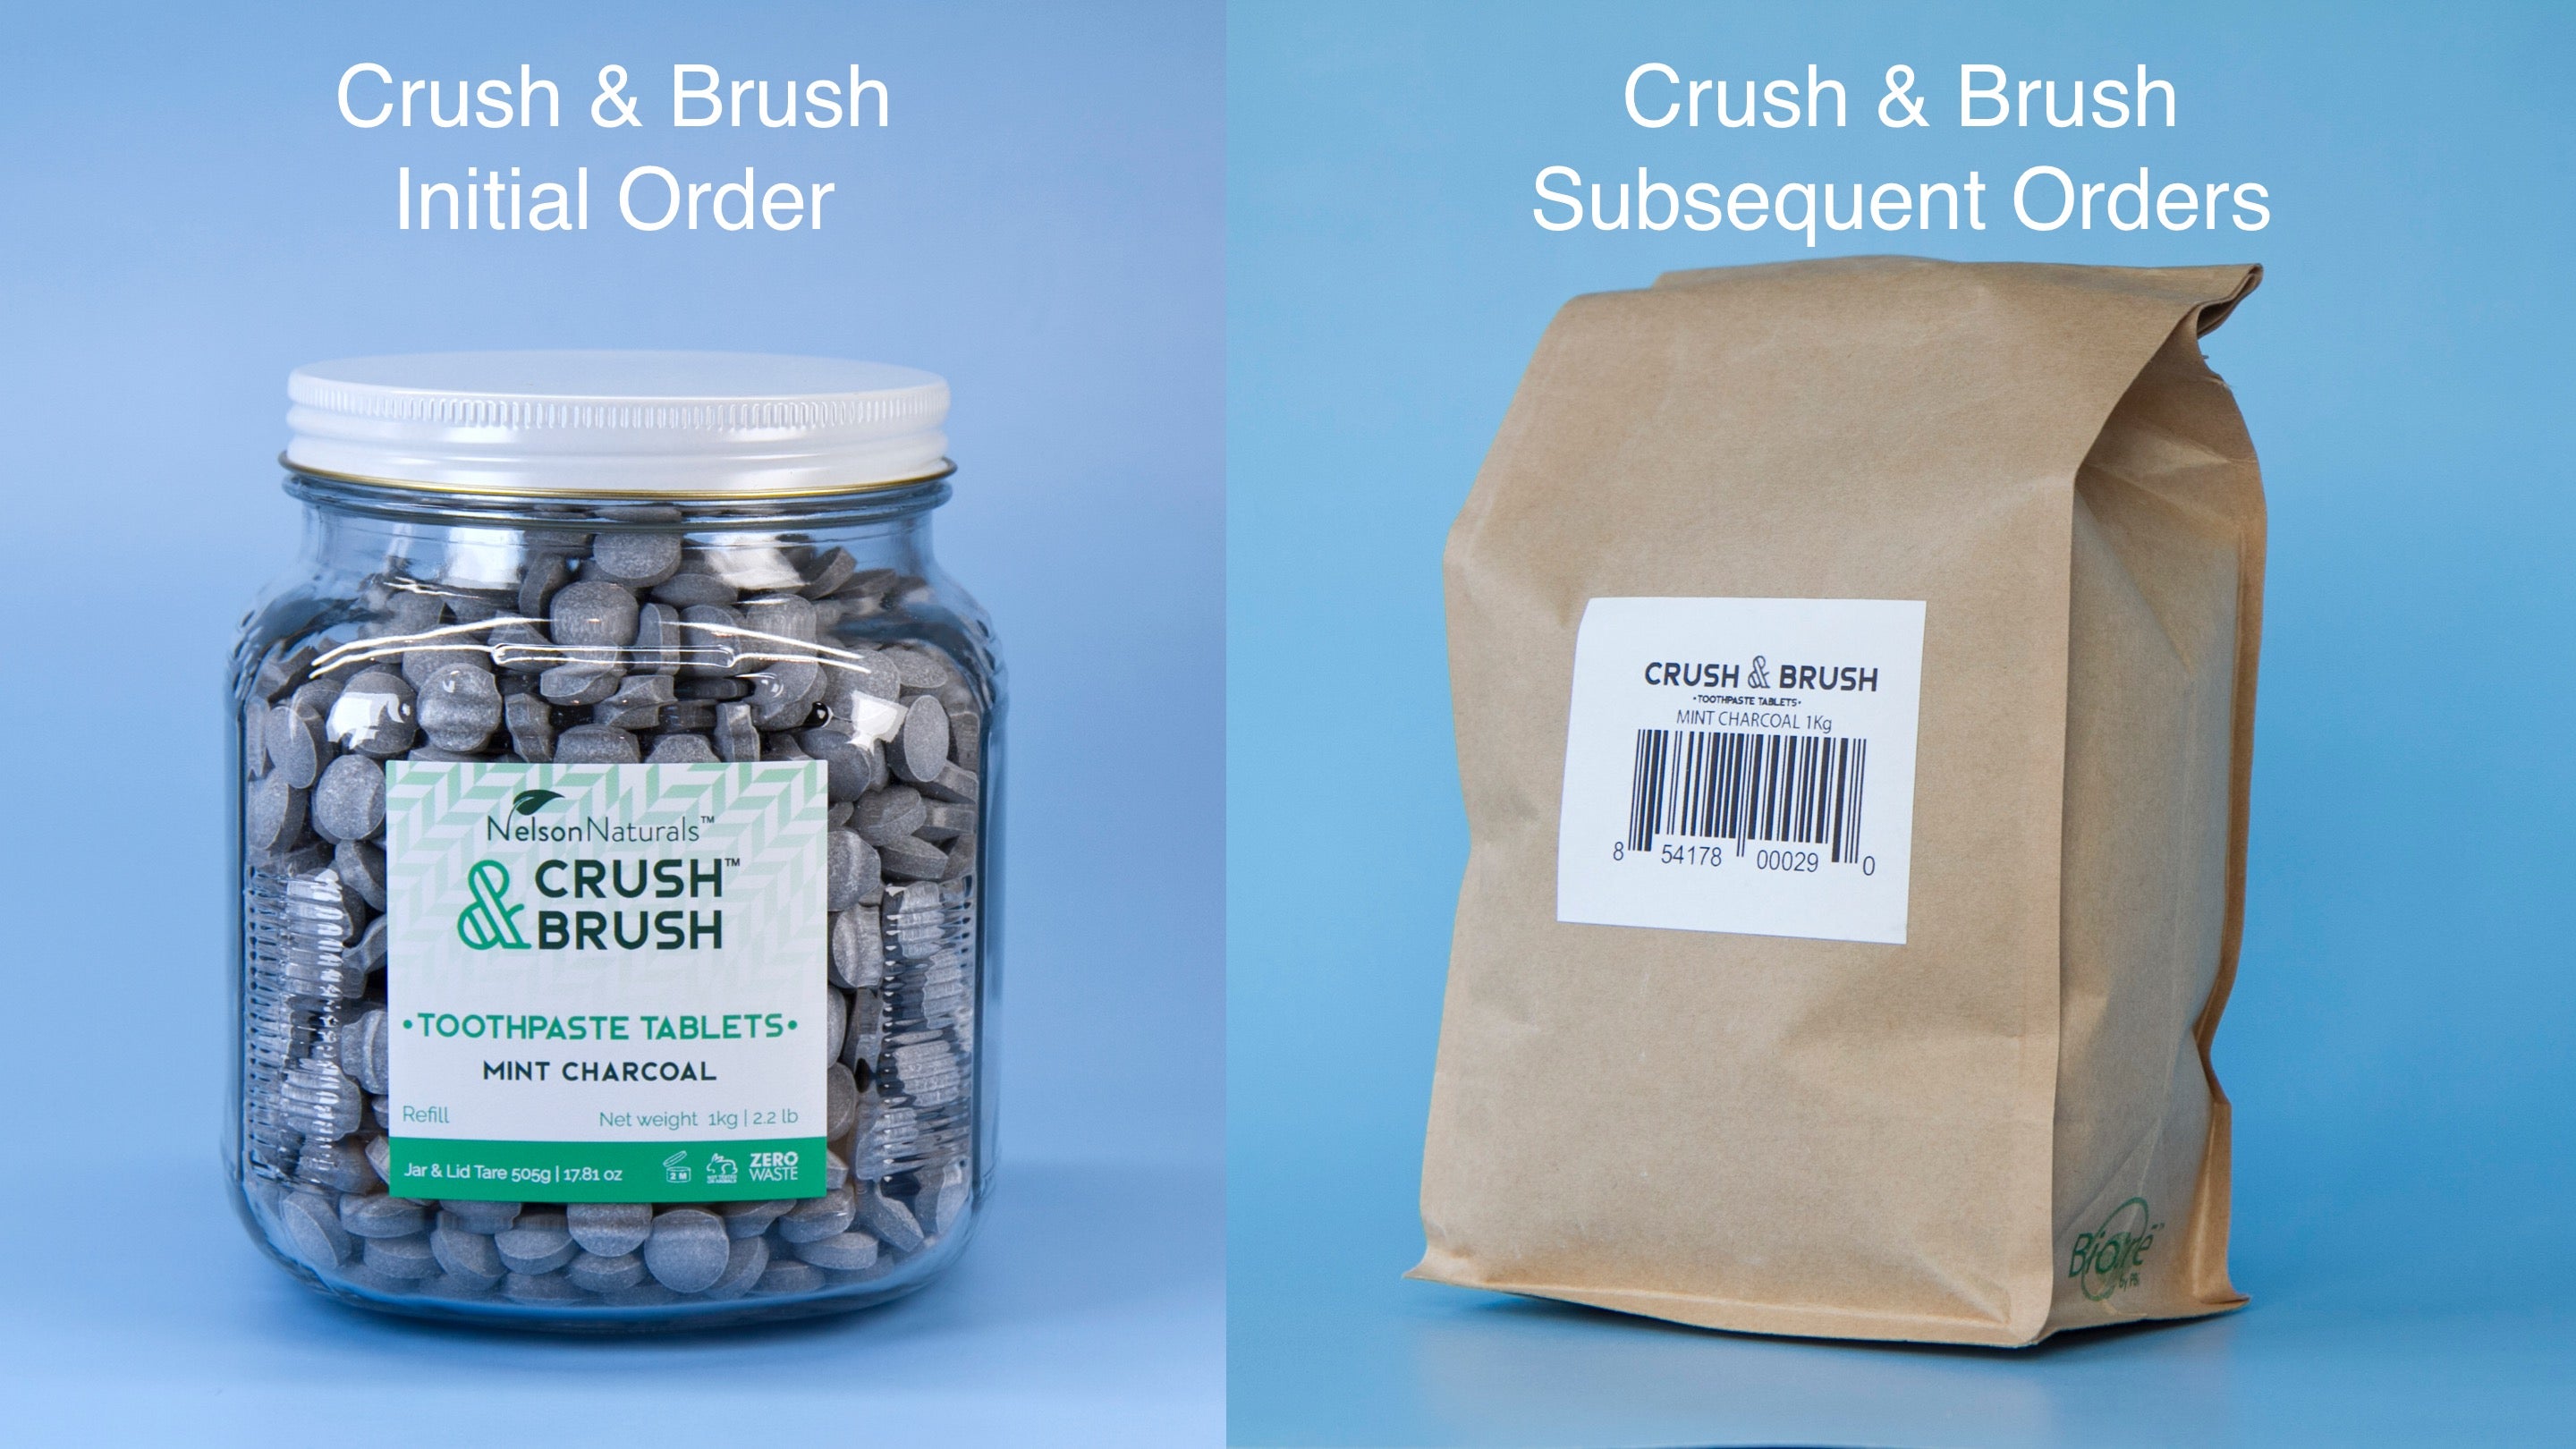 Crush & Brush CHARCOAL mint Tablets 1KG BULK WHOLESALE - [click for more info]  - nelsonnaturals remineralizing toothpaste